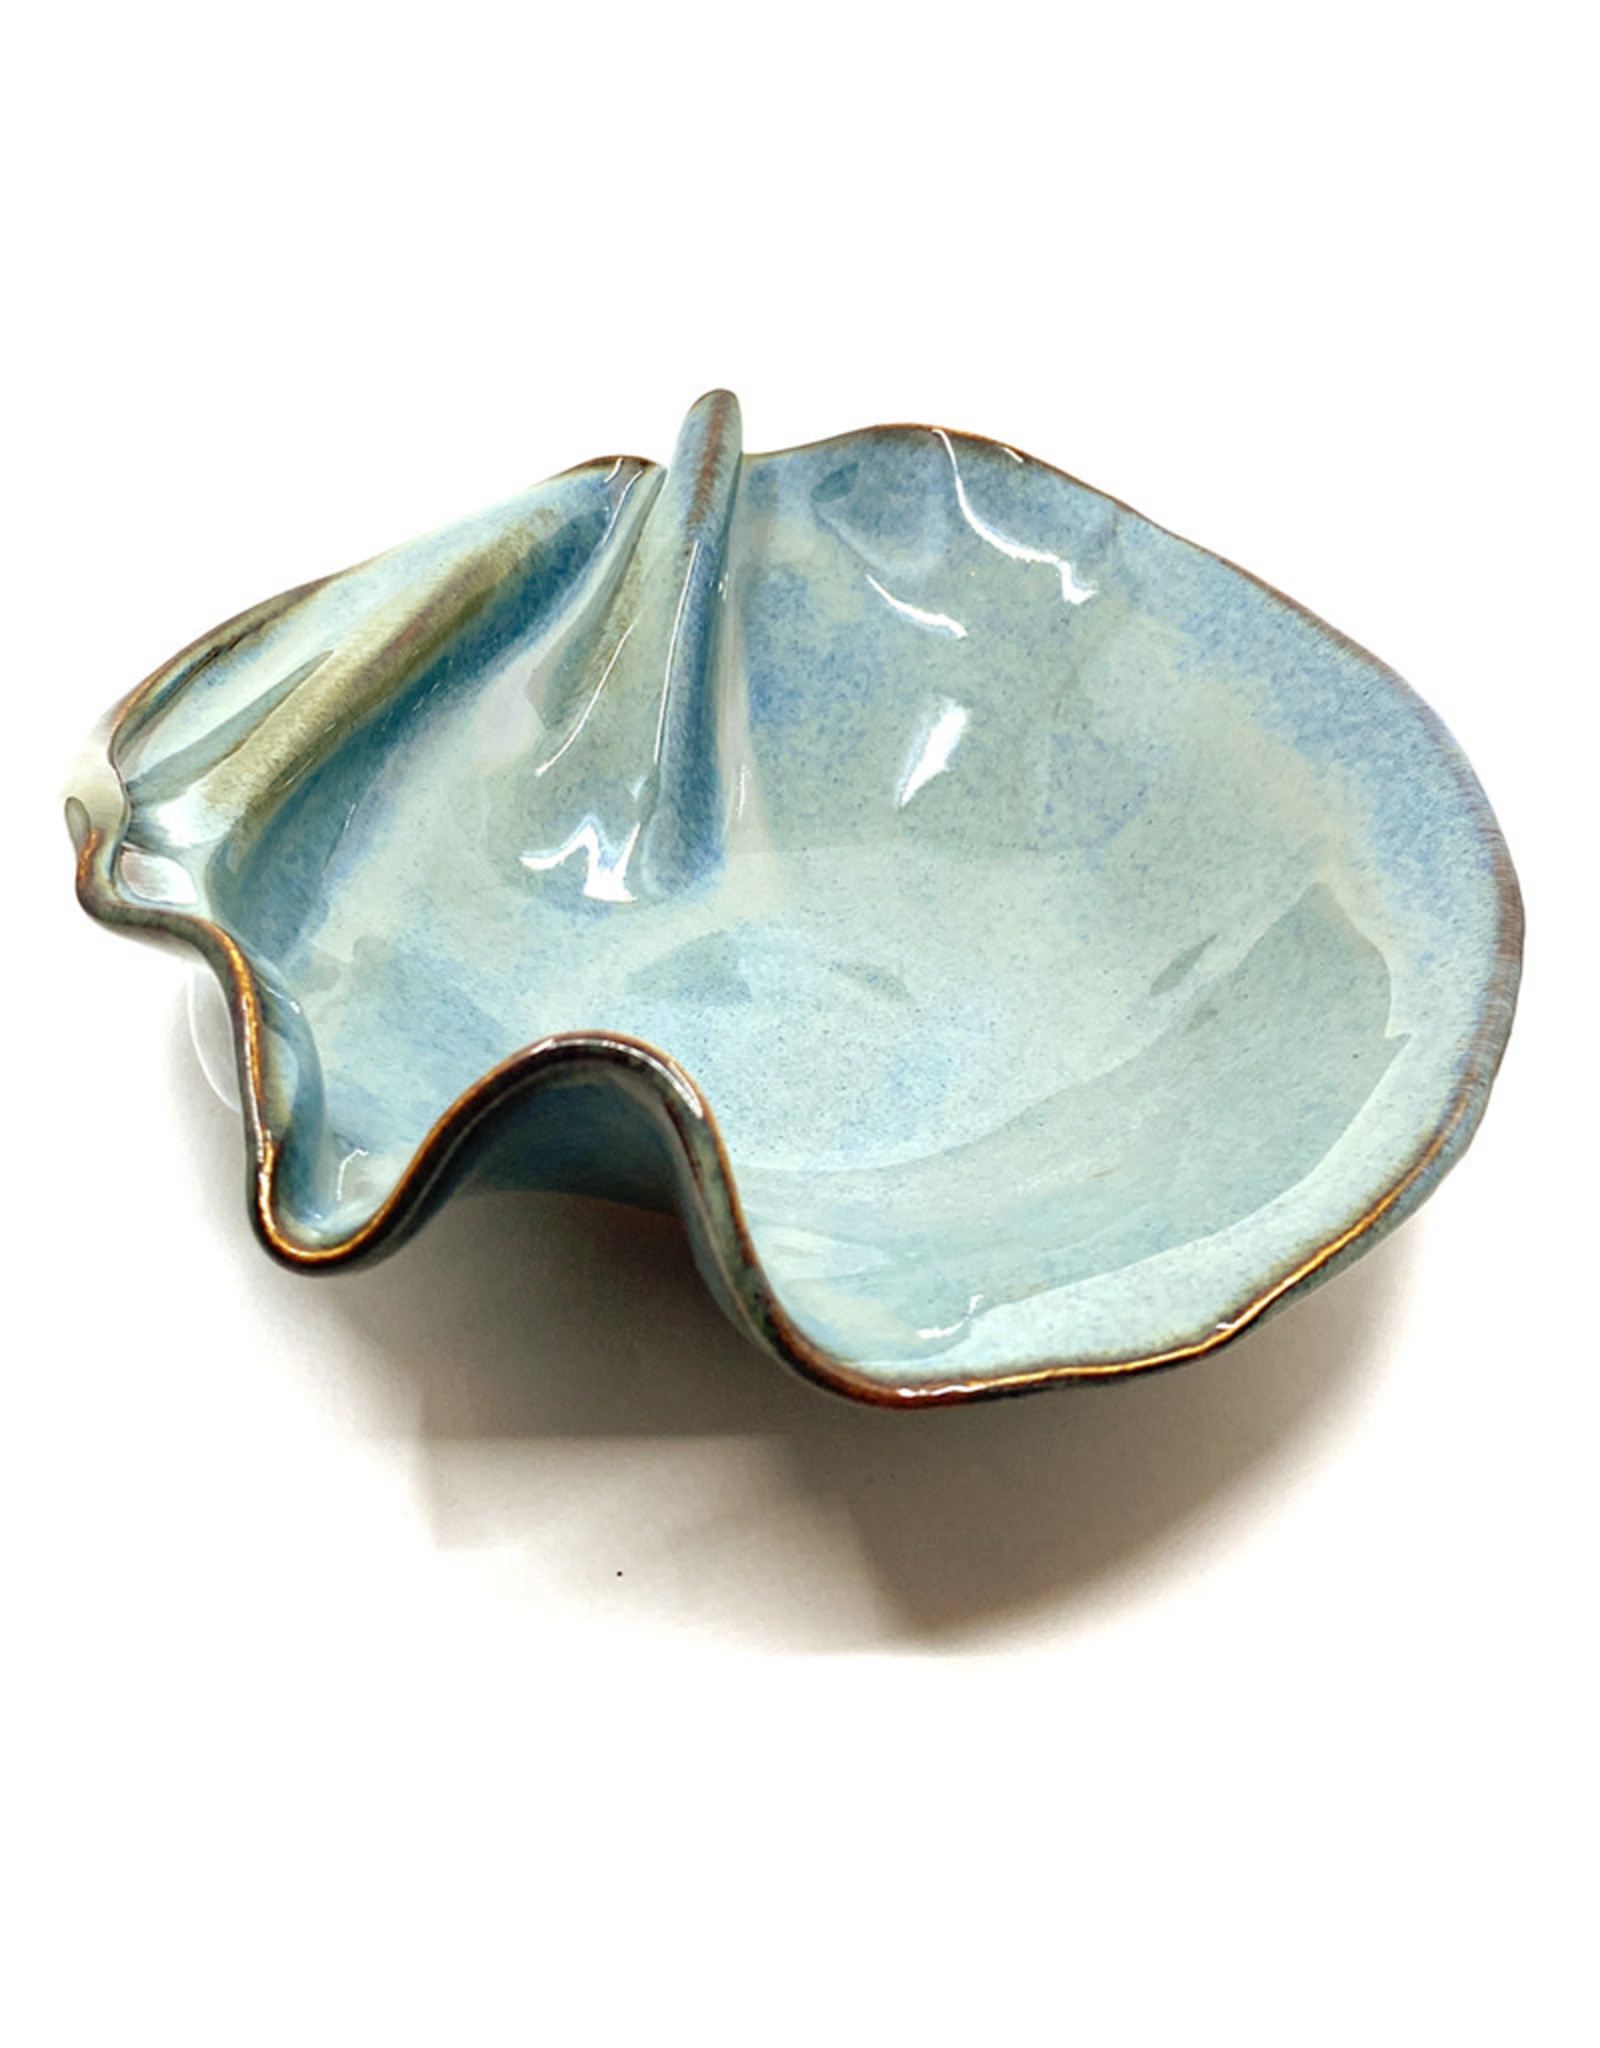 HILBORN POTTERY BLUE MEDLEY TAPENADE BOWL WITH SPOON